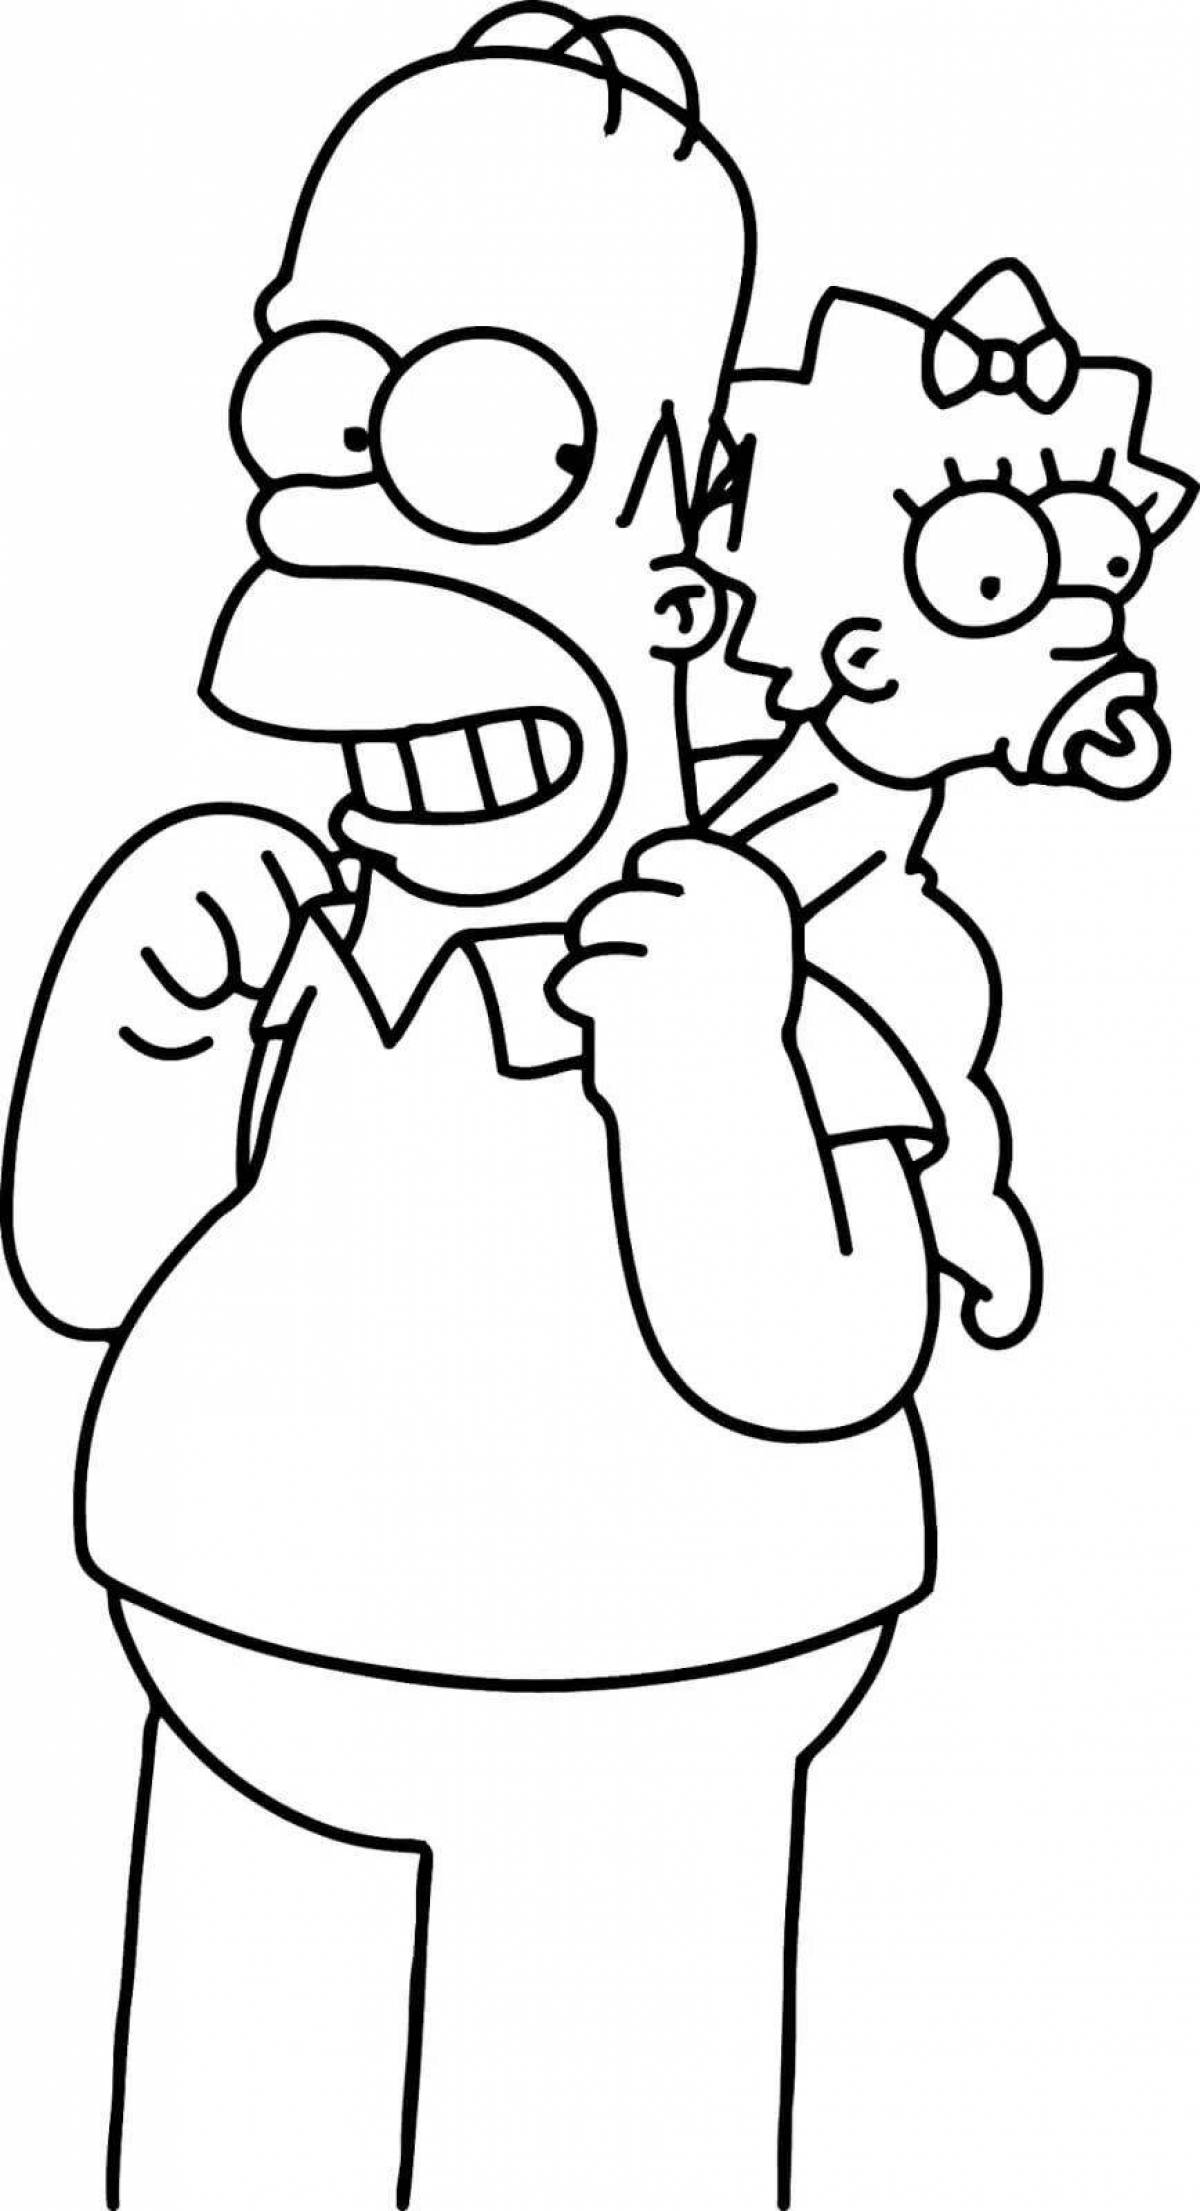 Coloring pages of homer simpson the flower freak